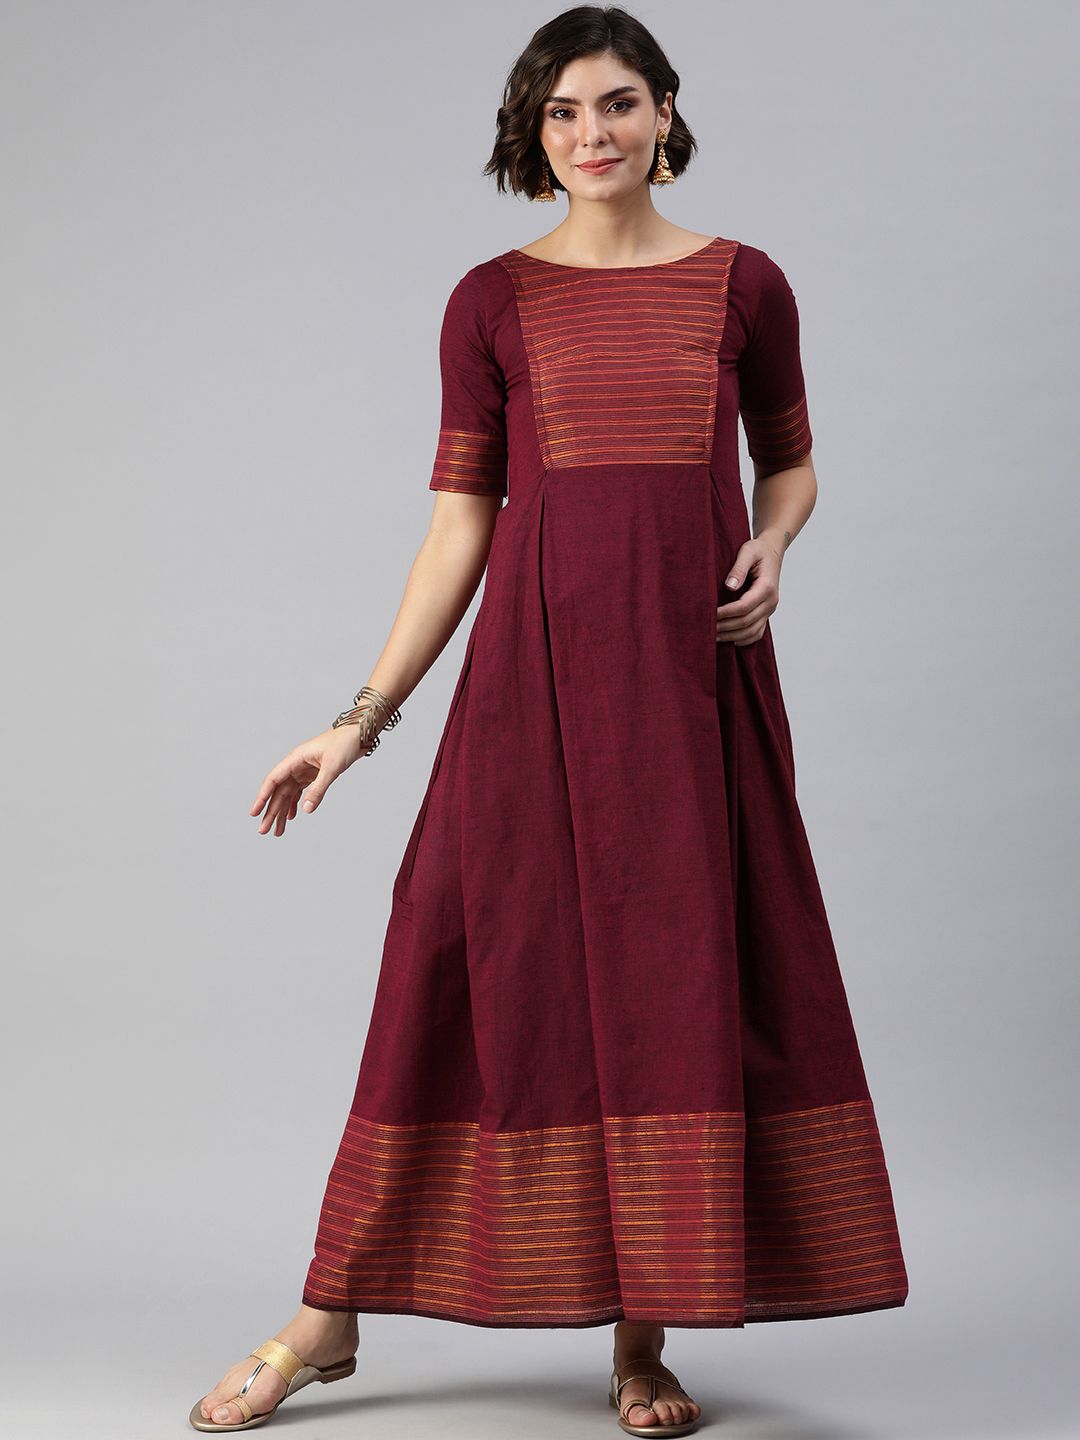 Swishchick Maroon Solid Maternity Maxi Dress Price in India